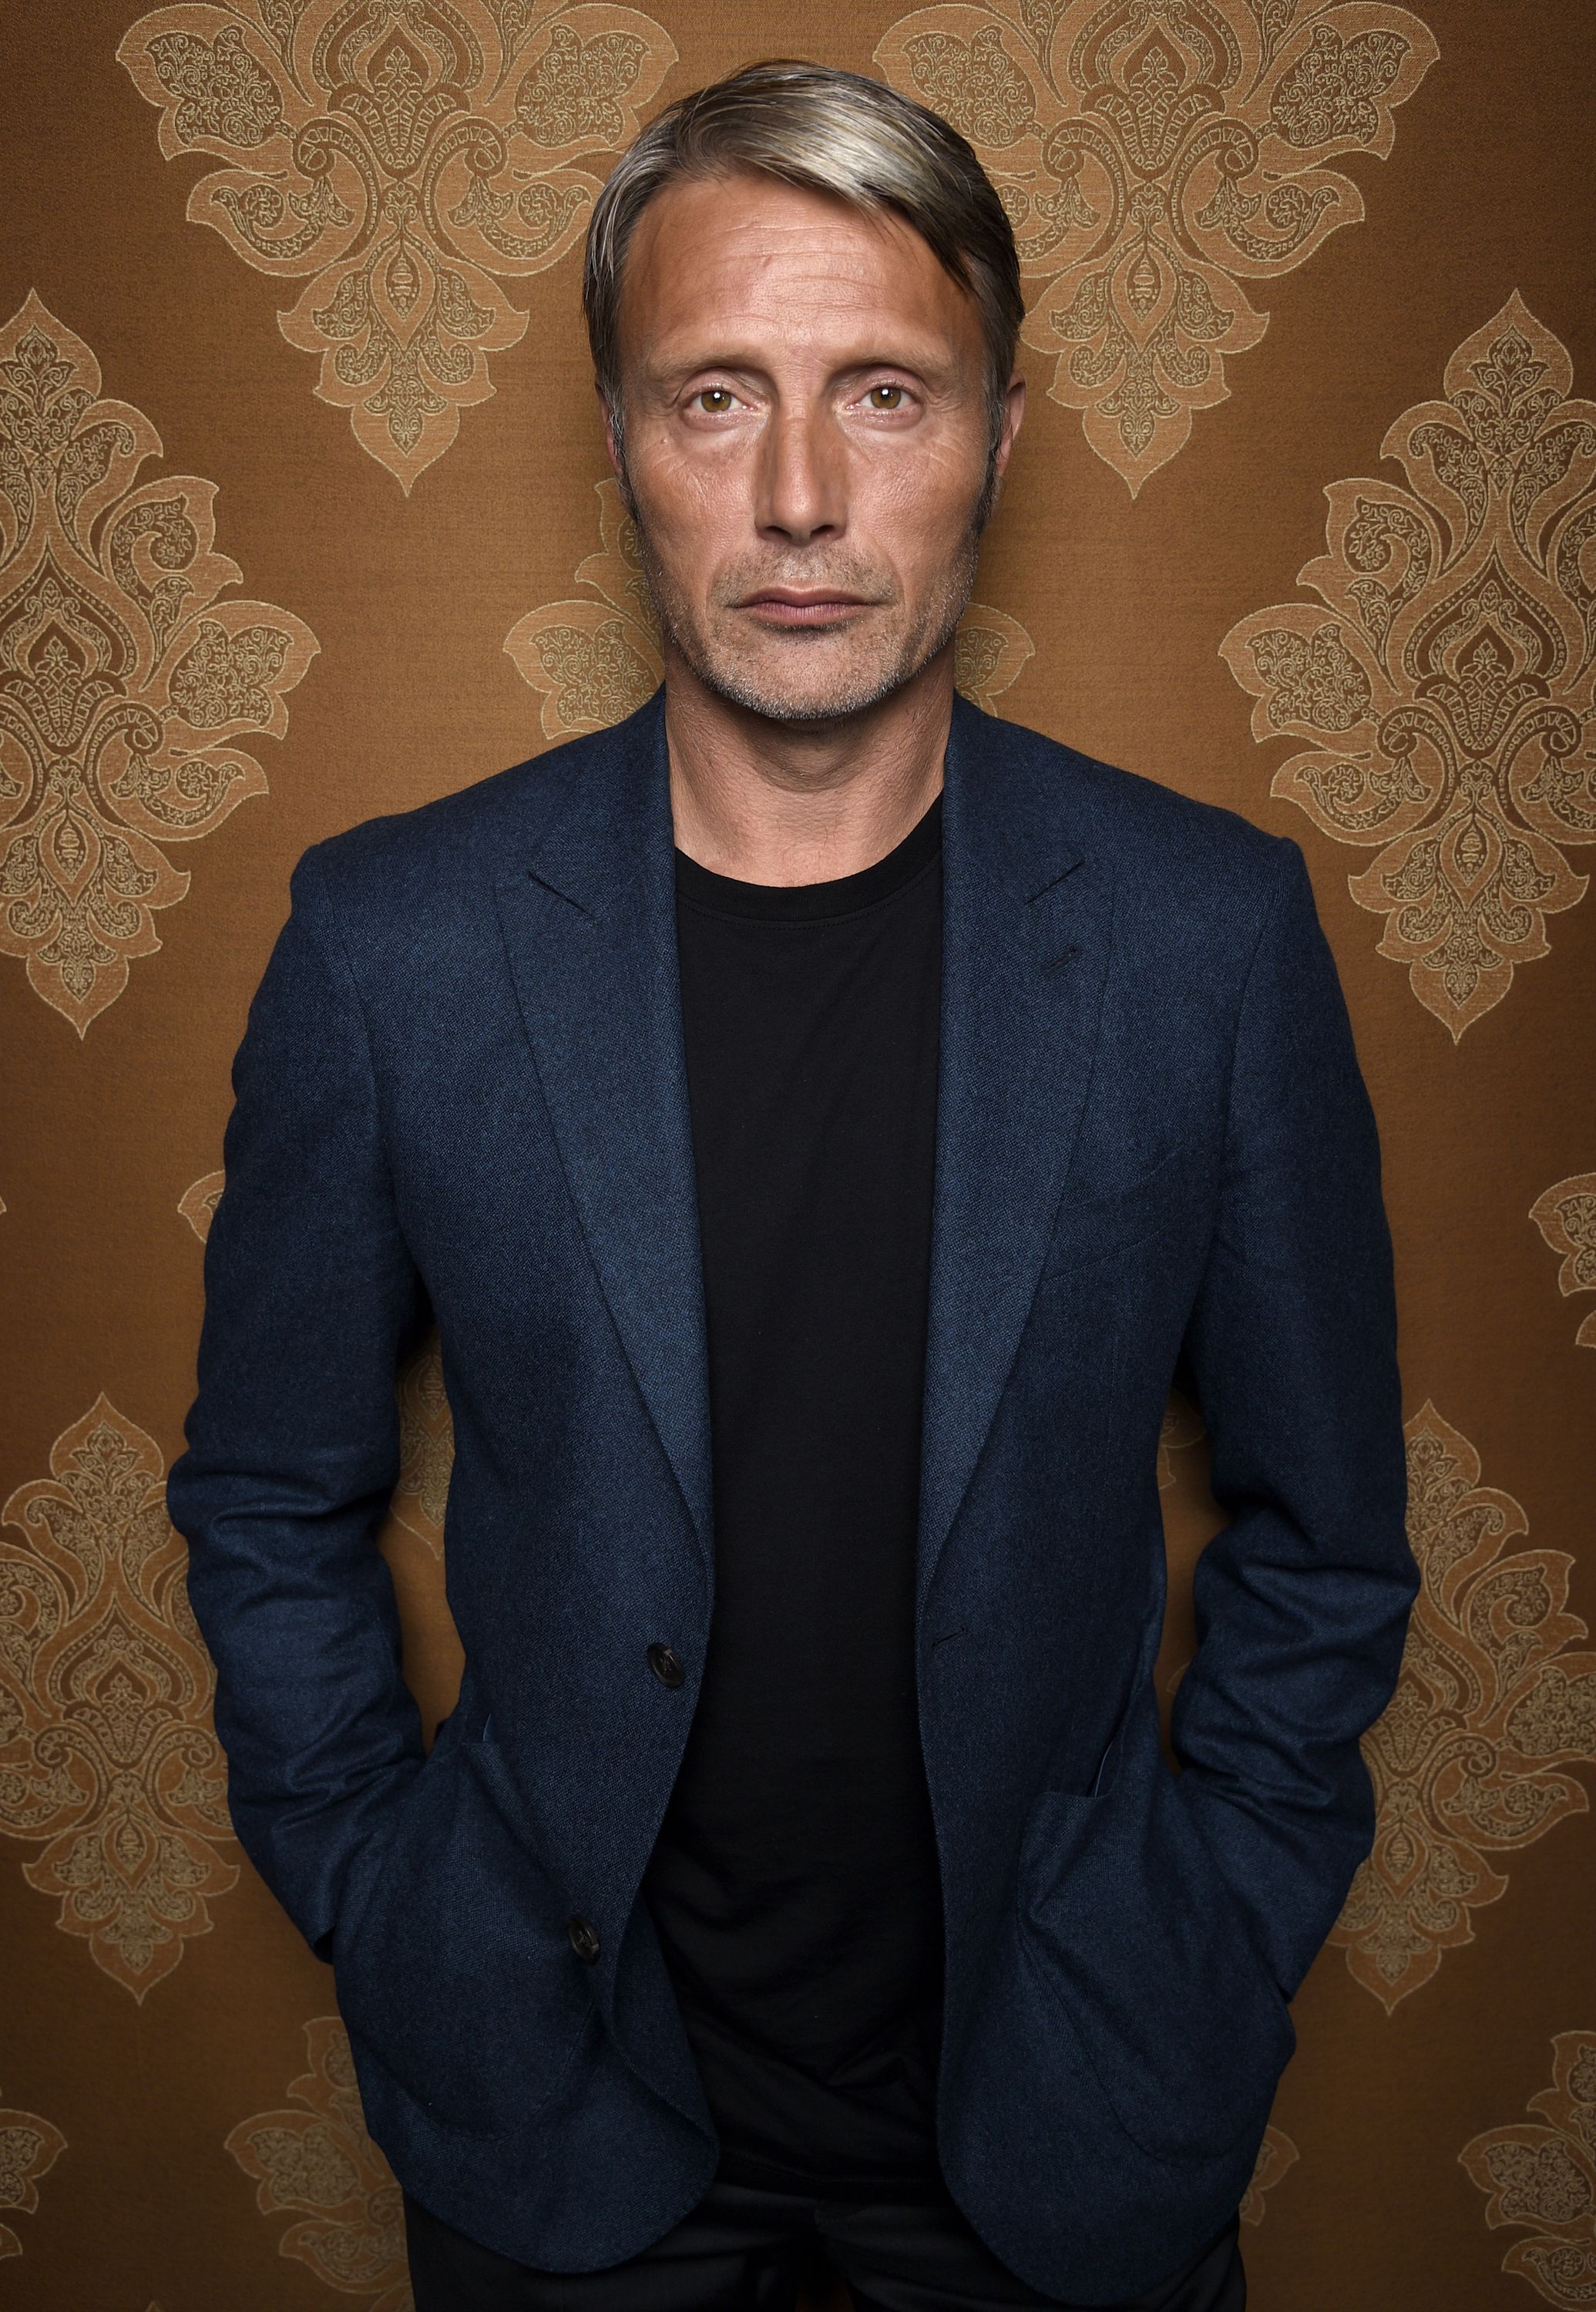 Mads Mikkelsen photo 65 of 58 pics, wallpaper - photo #927173 - ThePlace2